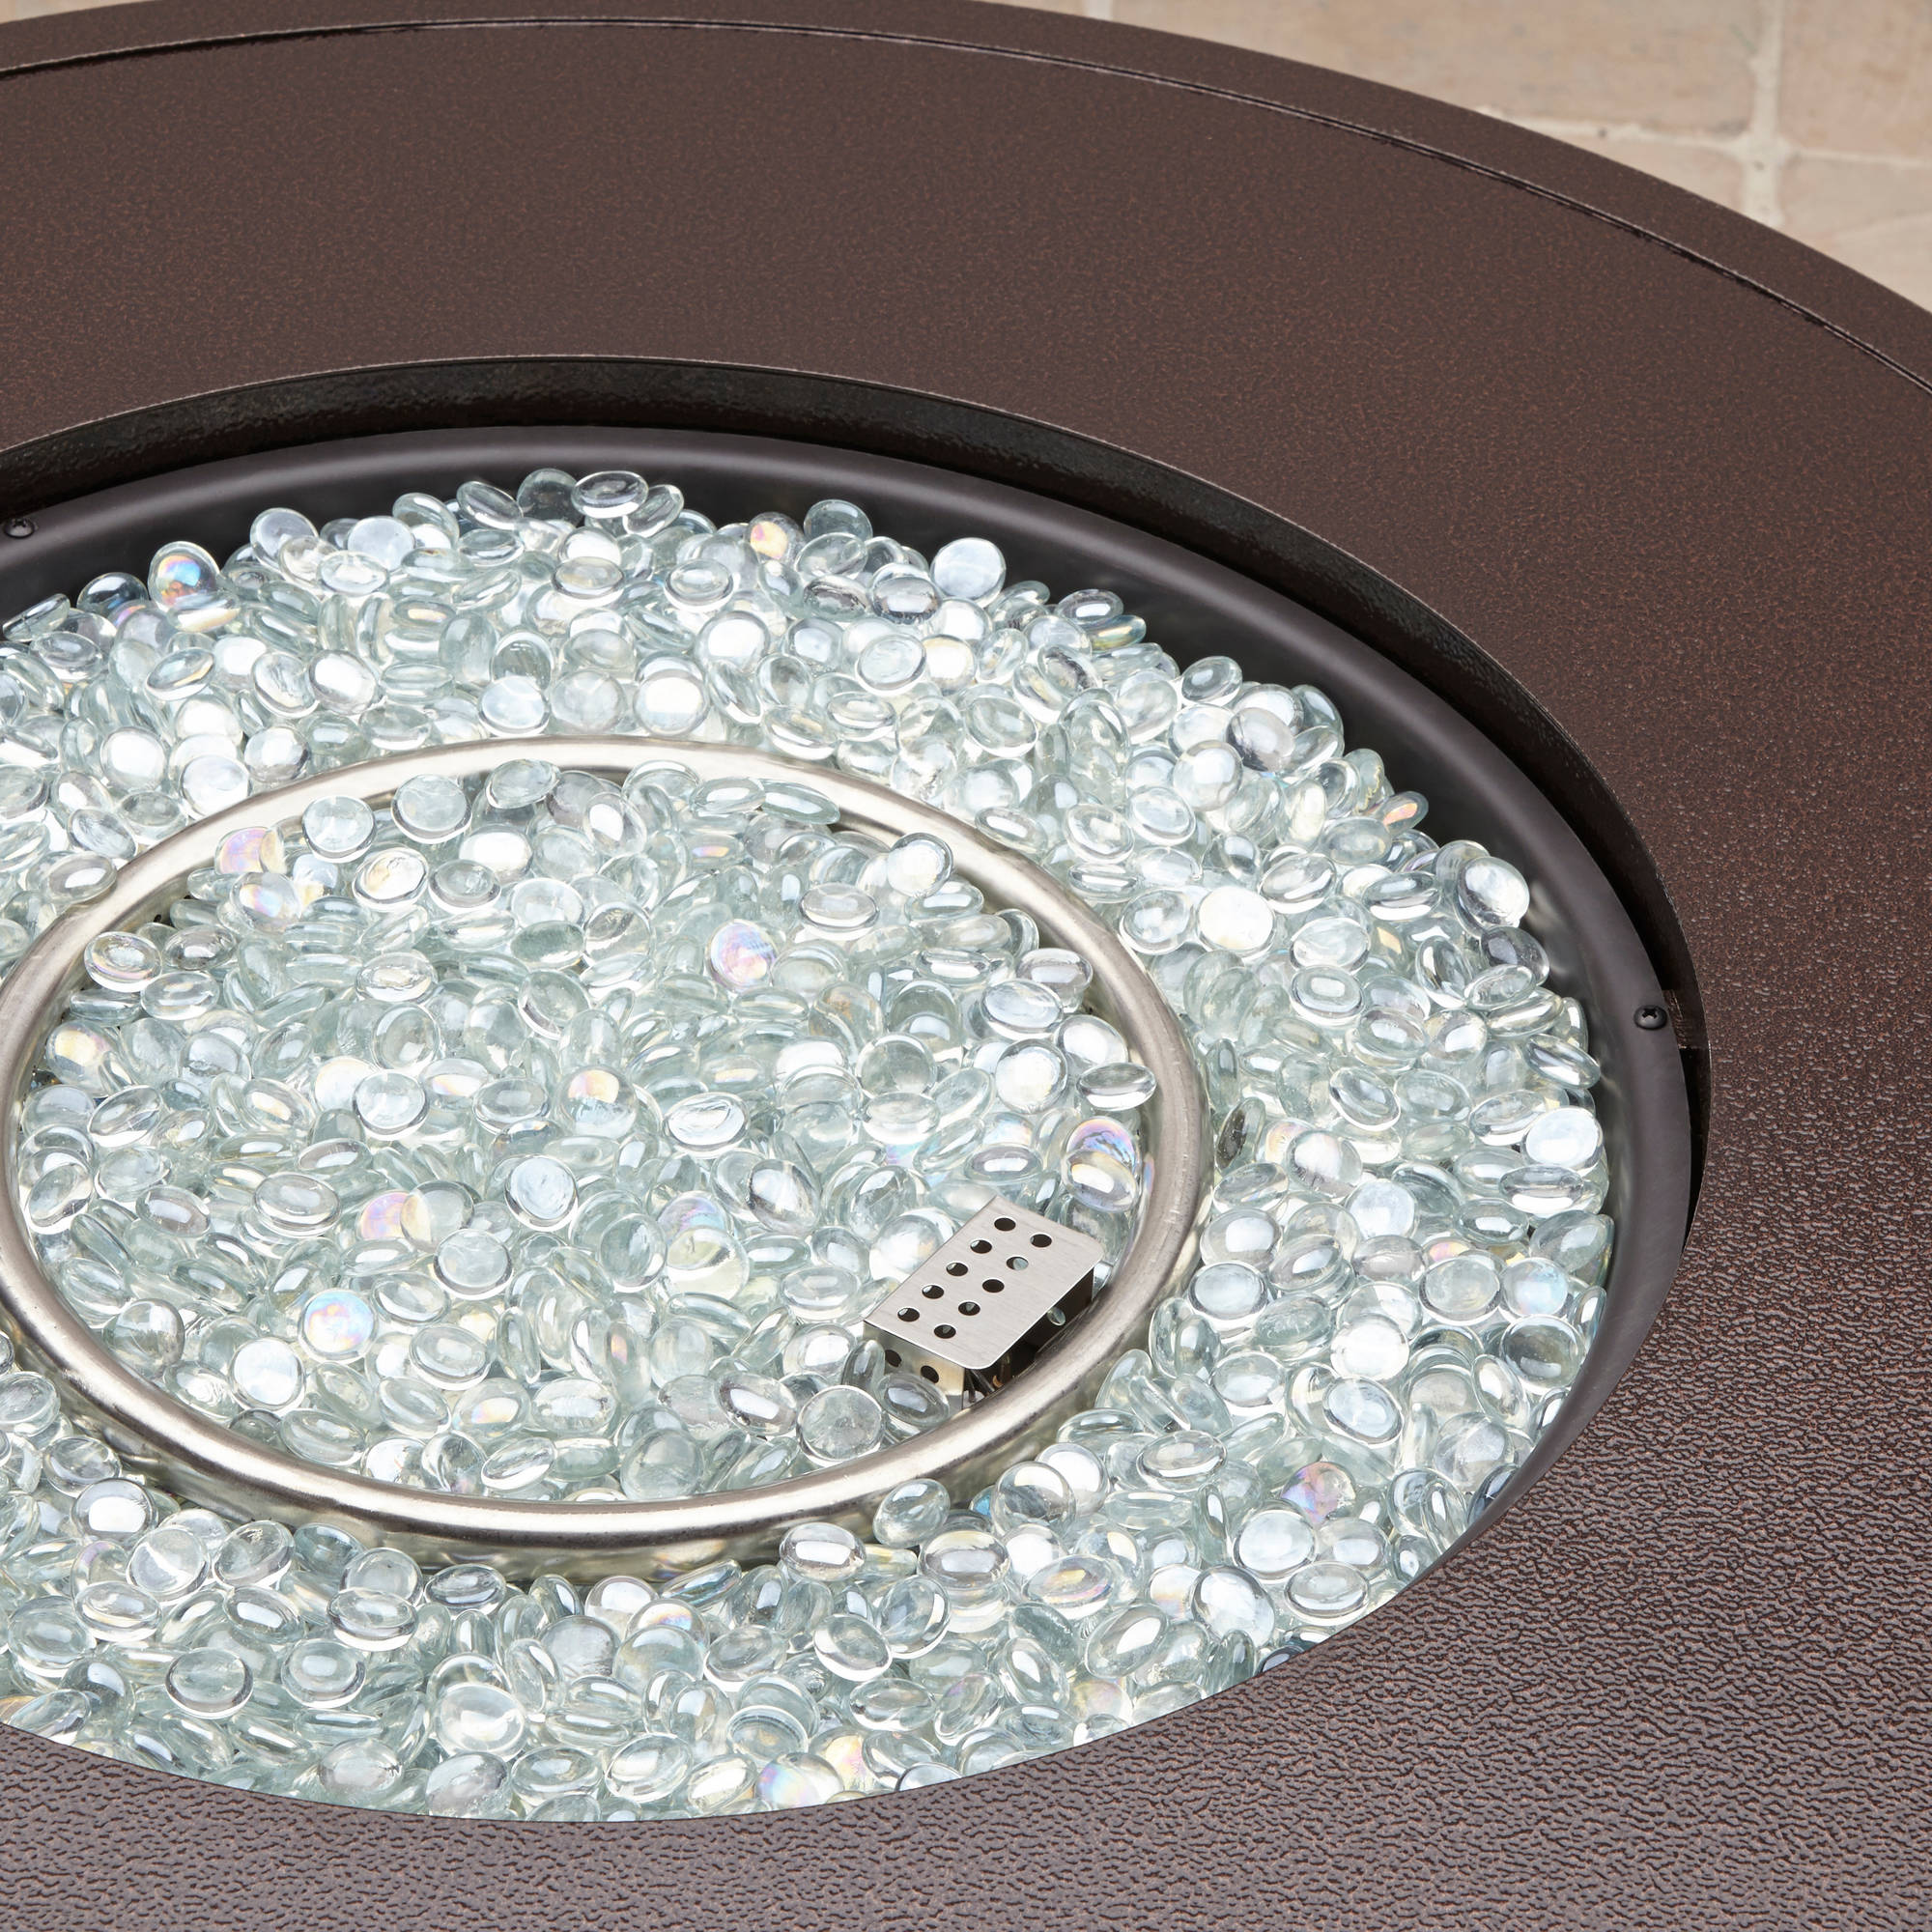 Better Homes & Gardens Colebrooke 37" Round 50,000 BTU Propane Gas Fire Pit Table with Glass Beads, Metal Lid and Protective Cover - image 3 of 14